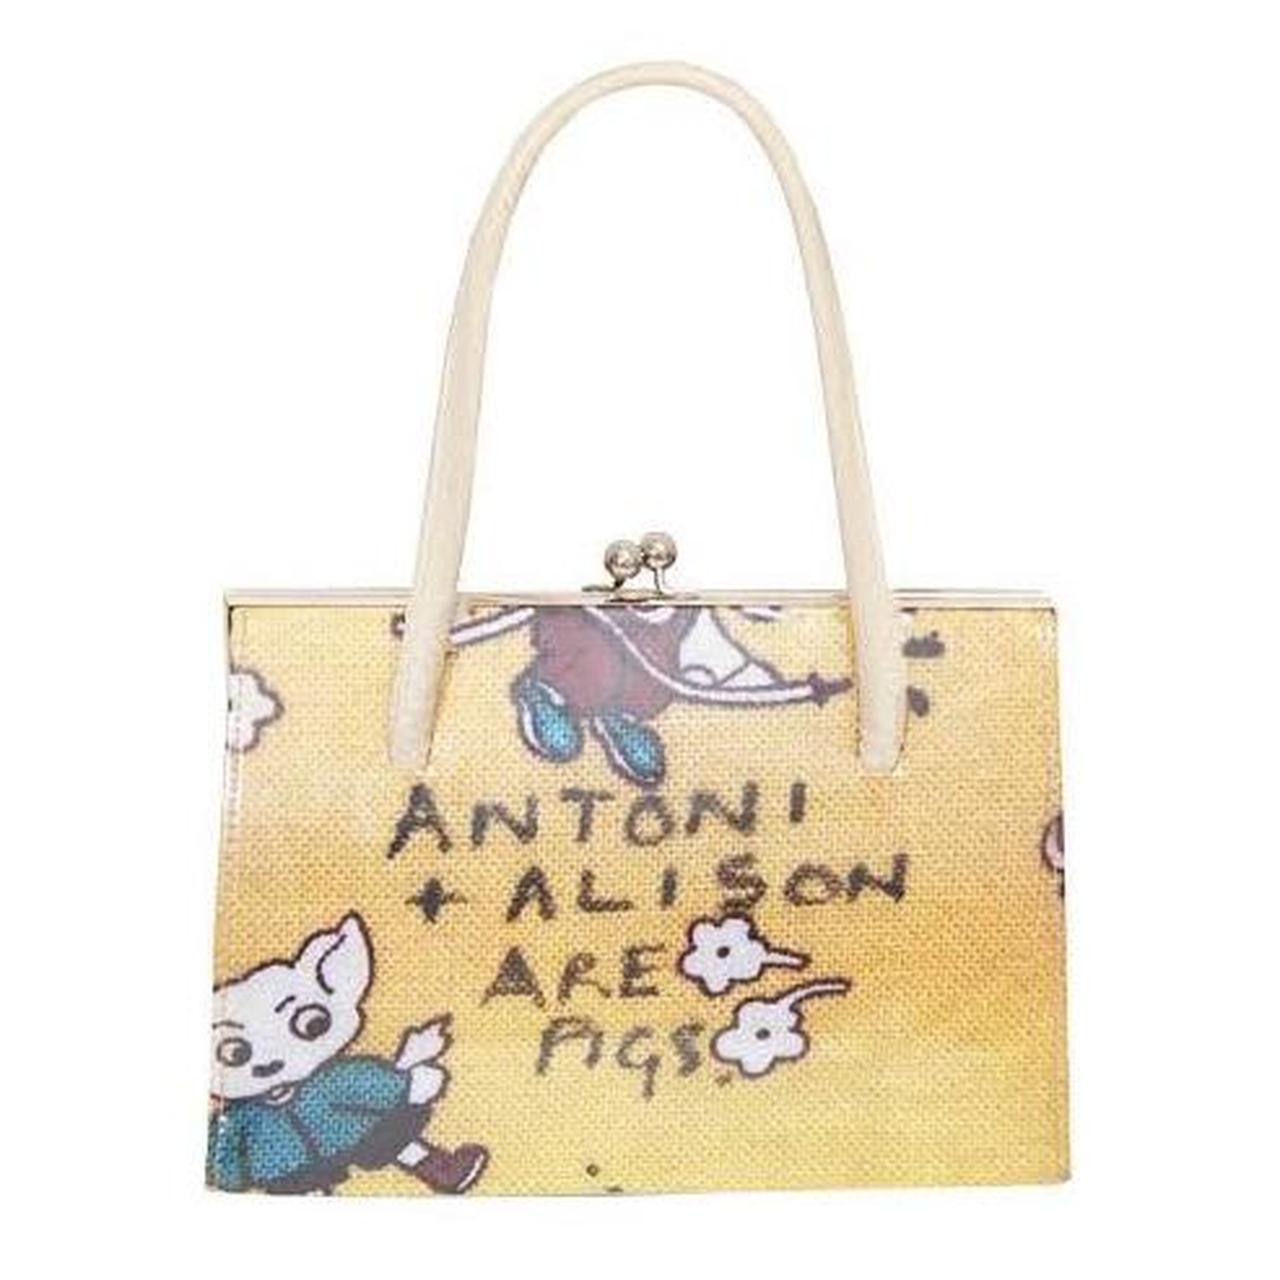 Looking for these Antoni & Alison bags. 🗝 - Depop